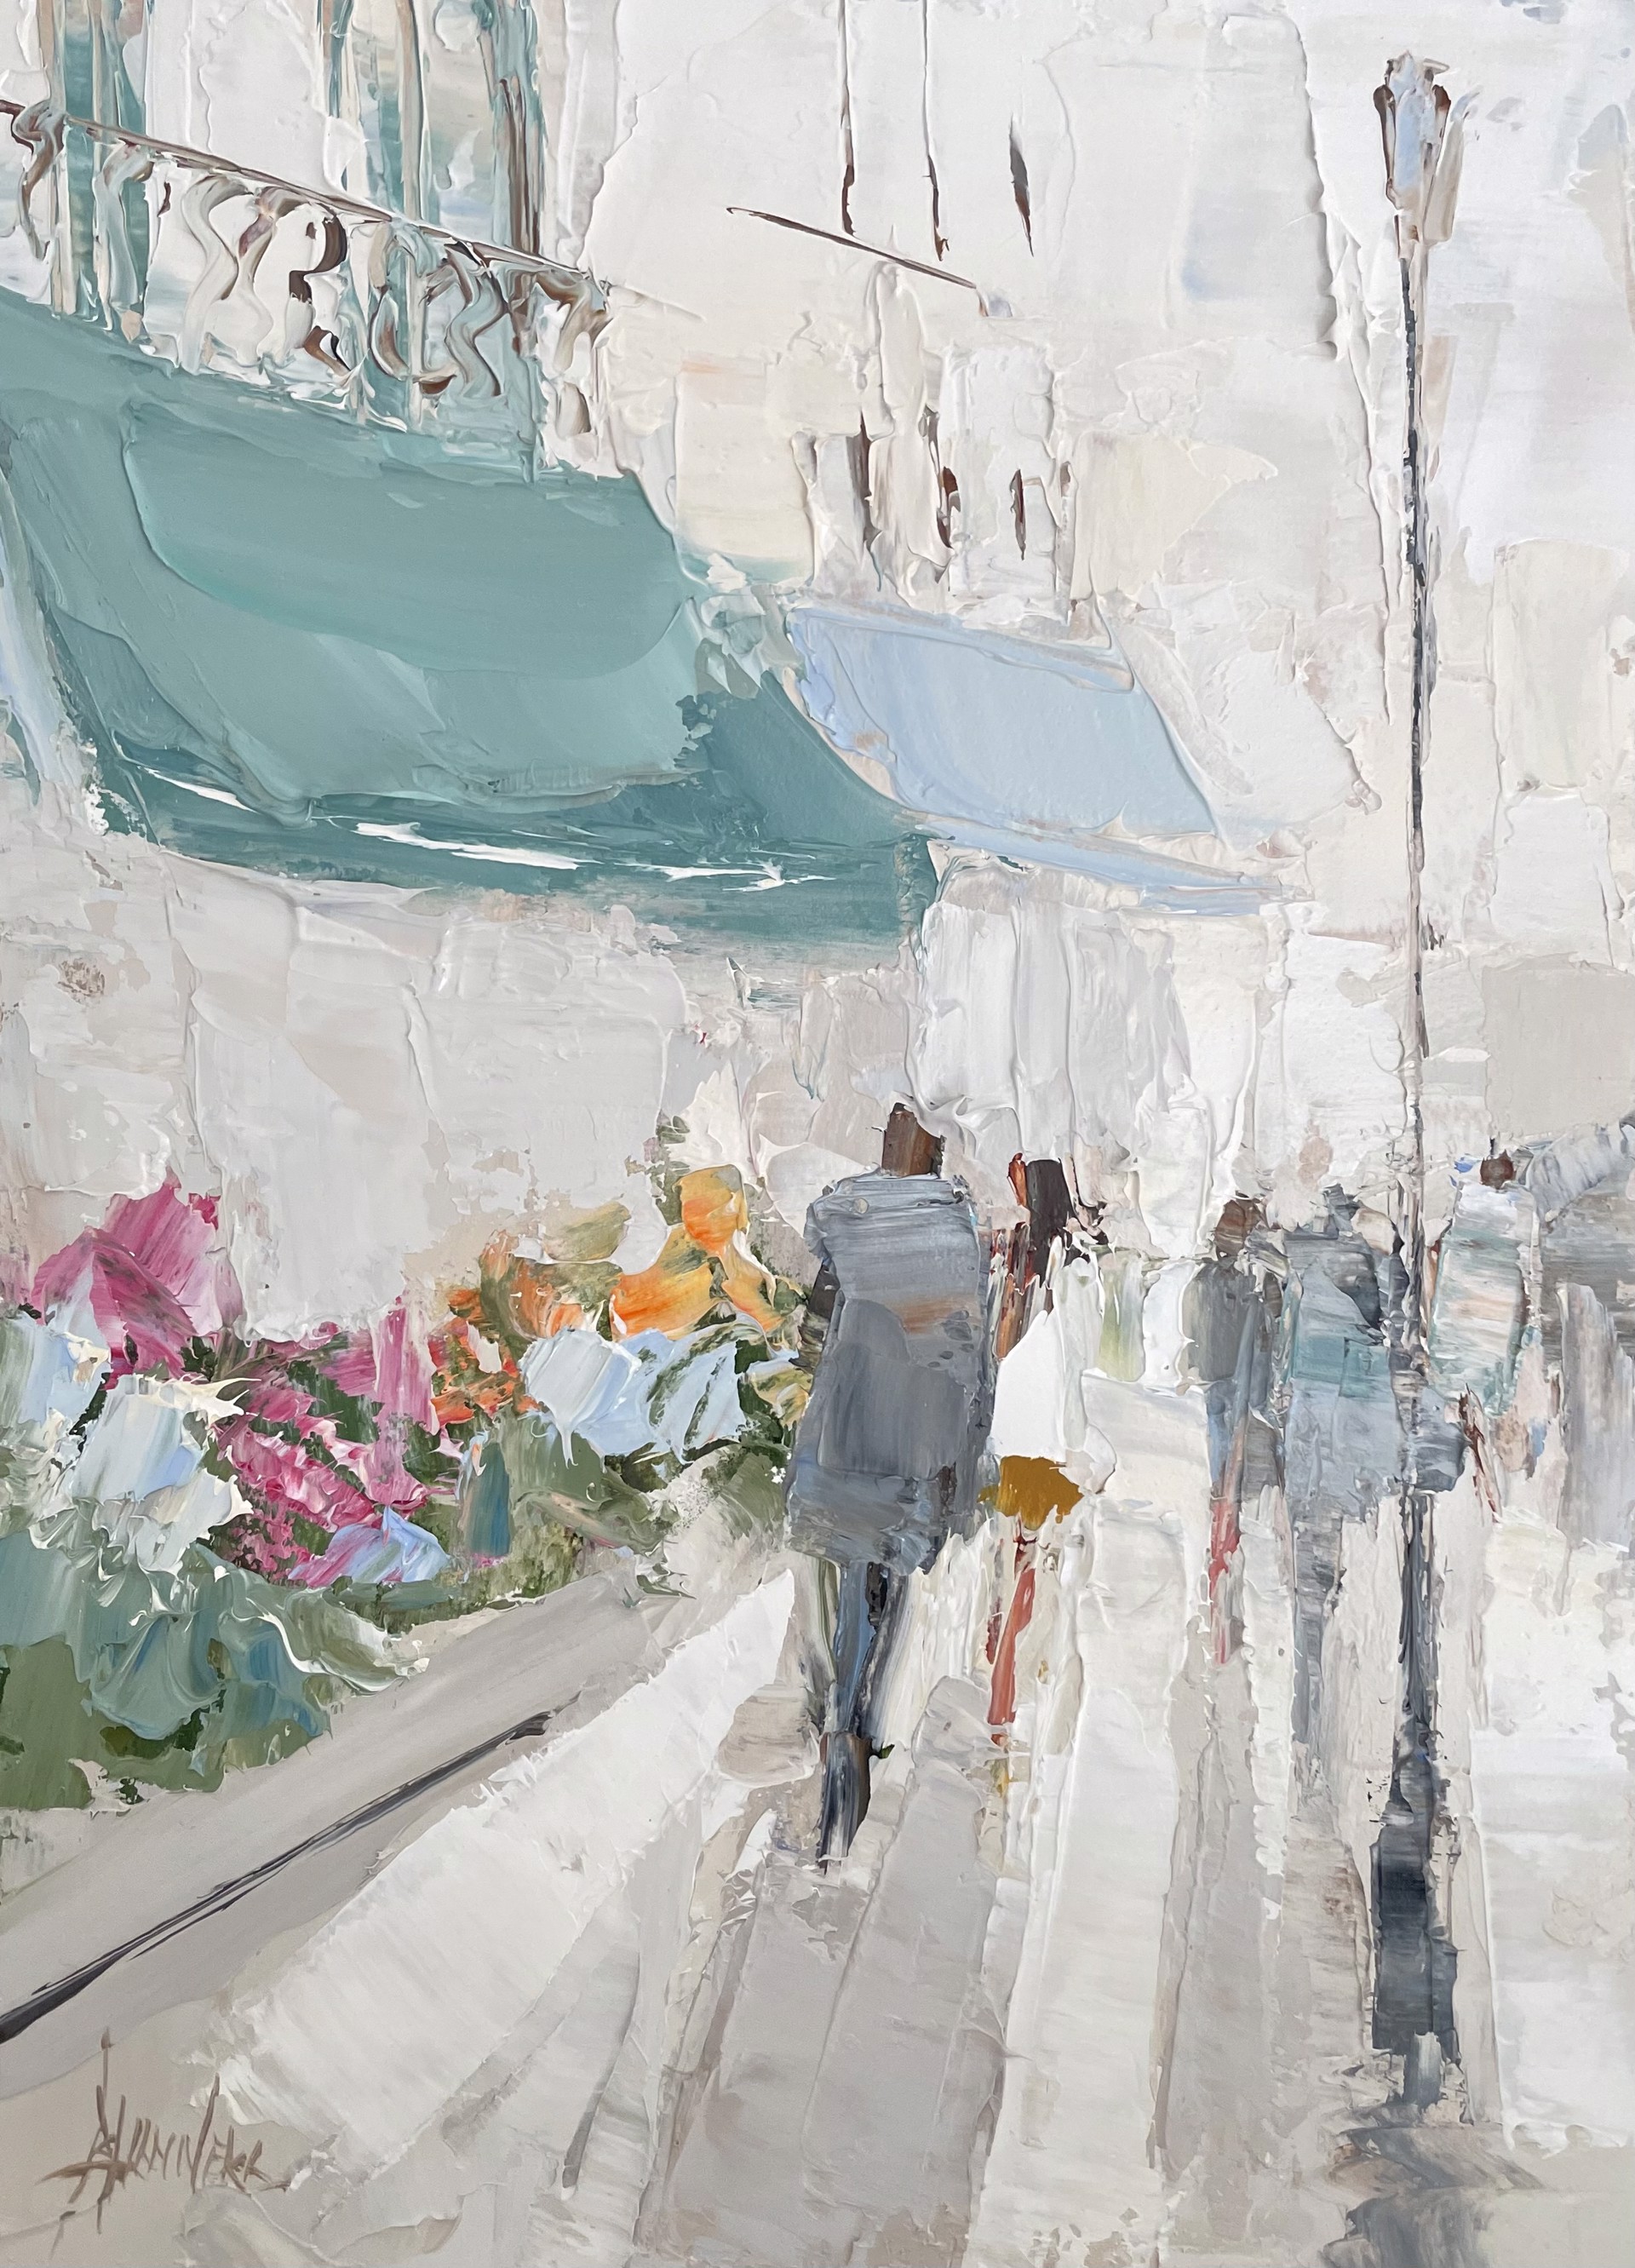 Flower Shopping, Paris {SOLD} by Barbara Flowers